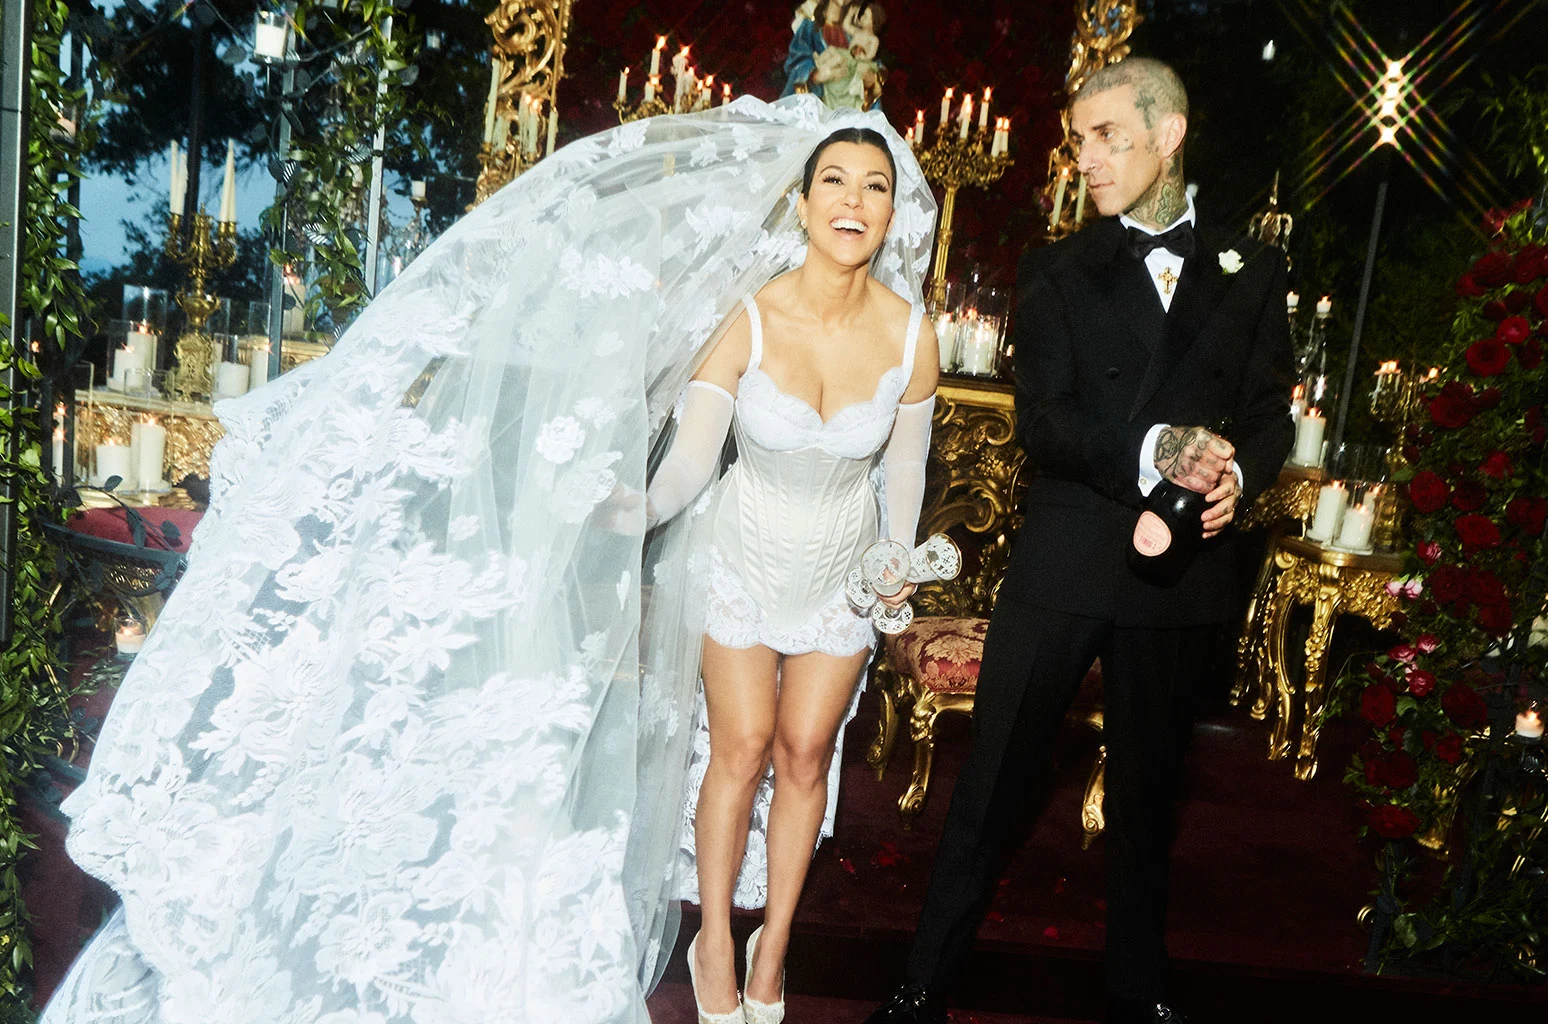 Kourtney Kardashian and Travis Barker's wedding photo that the socialite and reality TV star posted on Instagram.